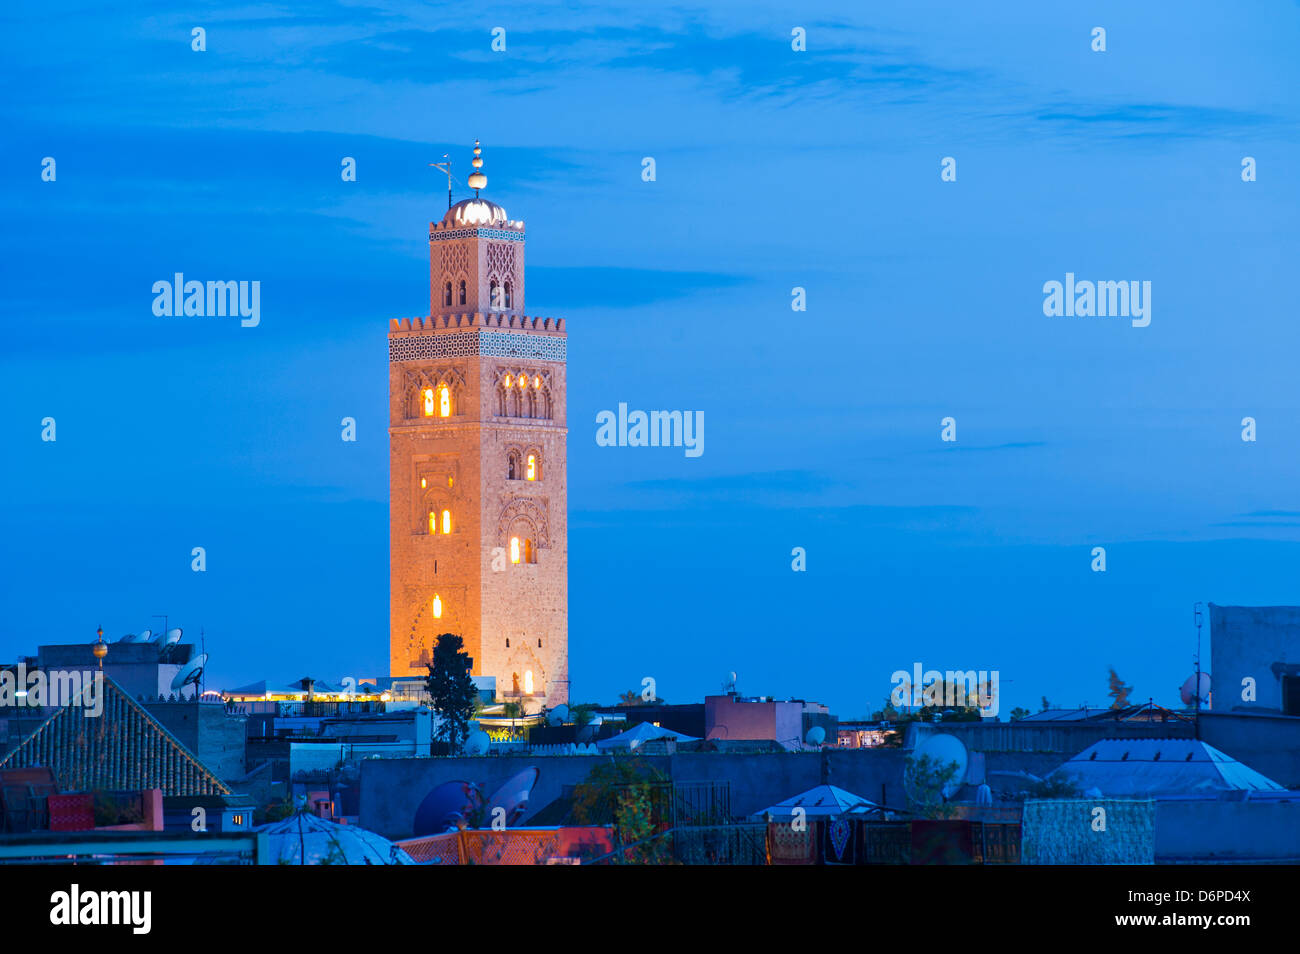 Koutoubia Mosque minaret at night, Marrakech, Morocco, North Africa, Africa Stock Photo